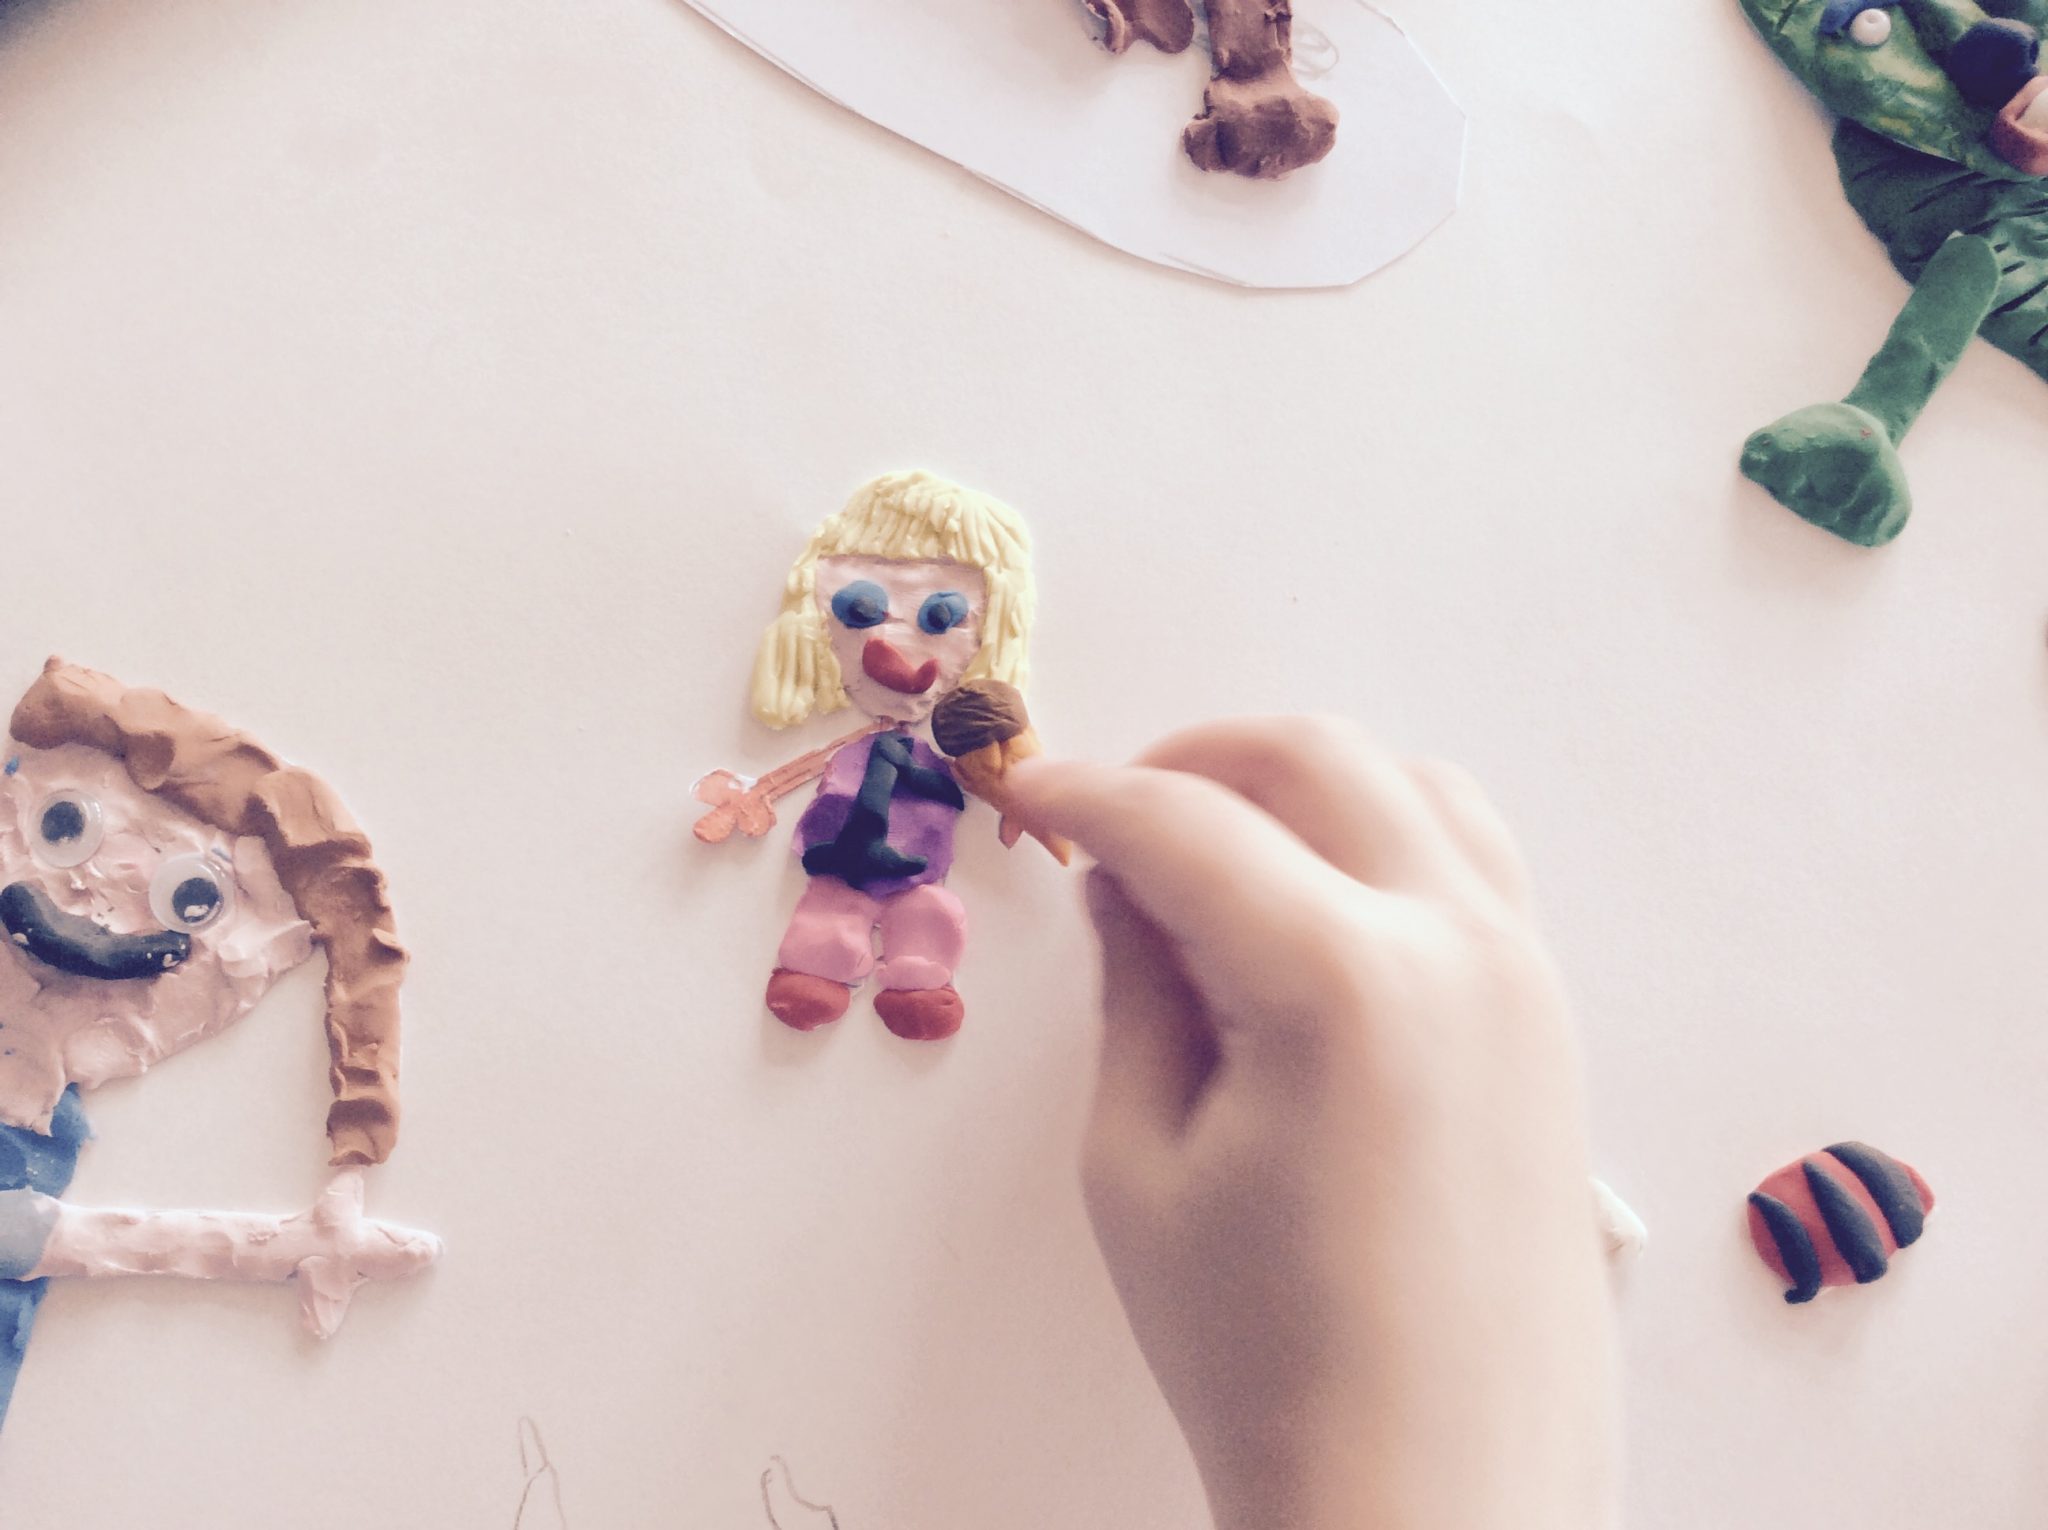 Image of Plasticine character for use in animation